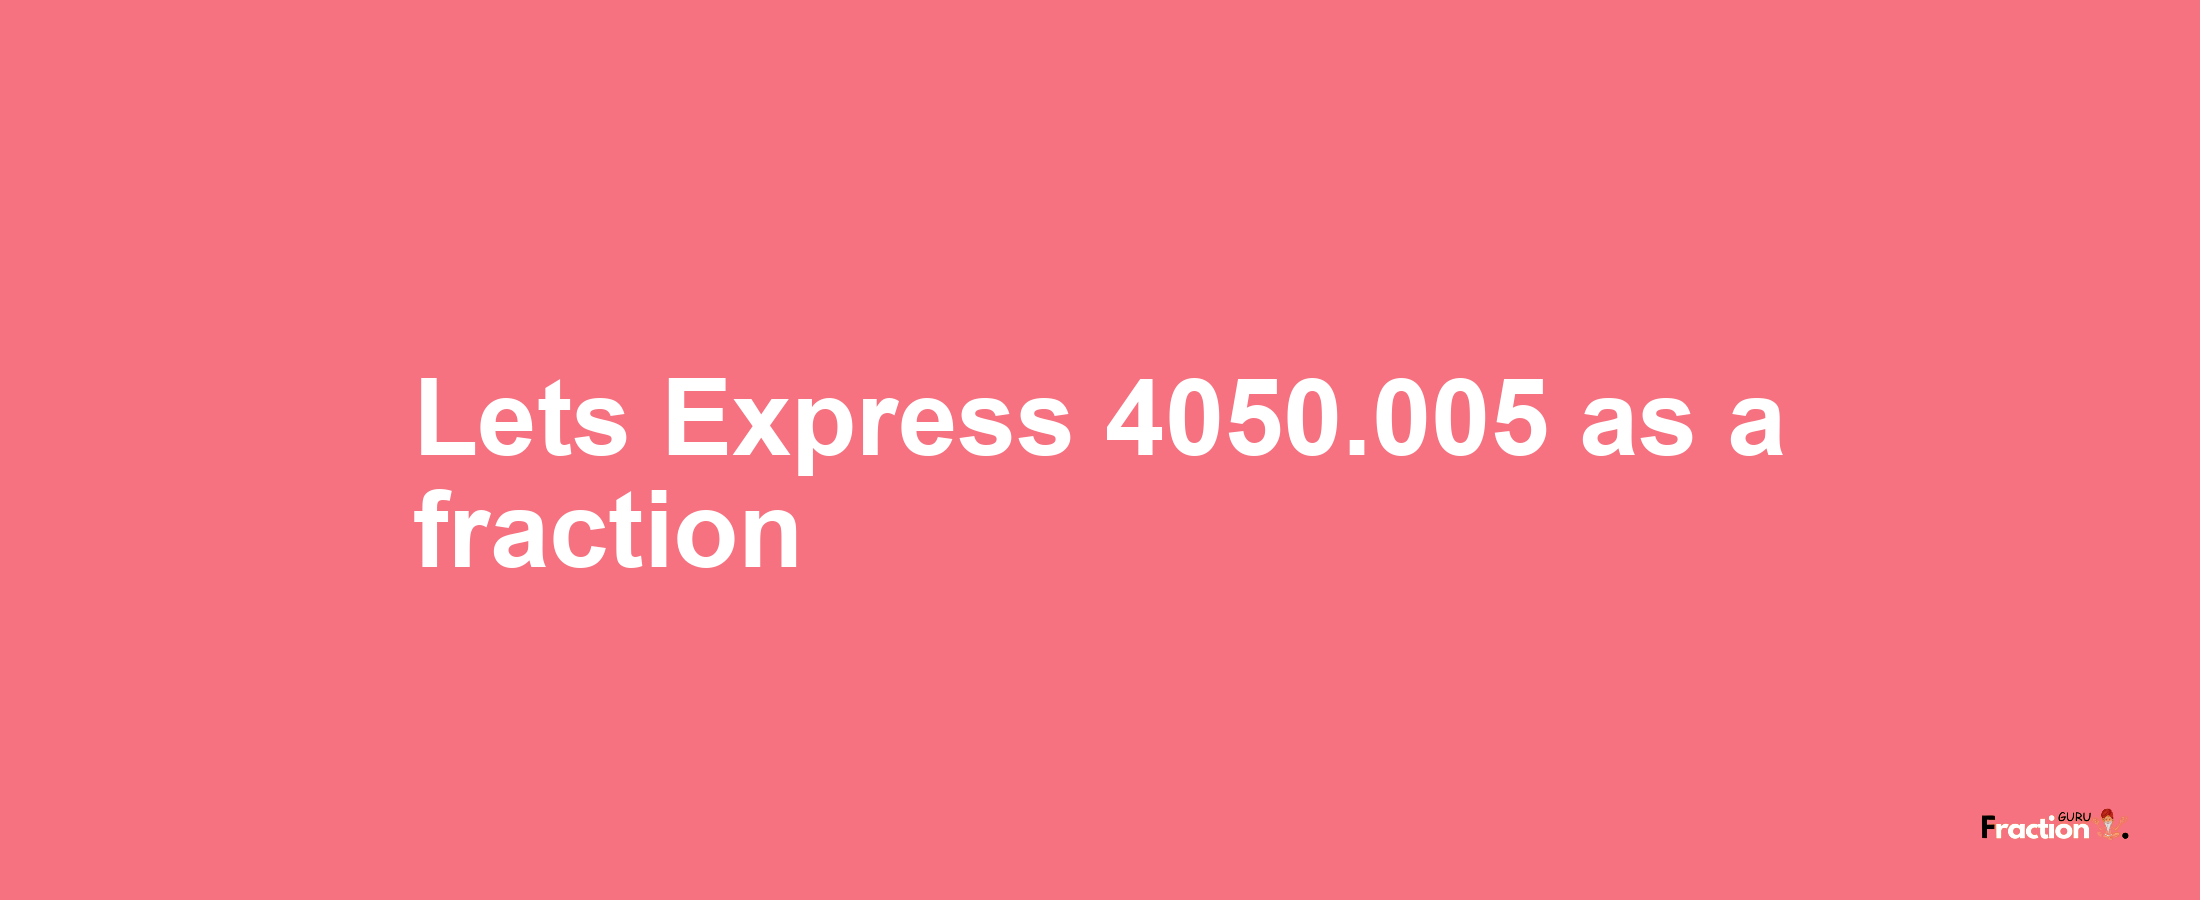 Lets Express 4050.005 as afraction